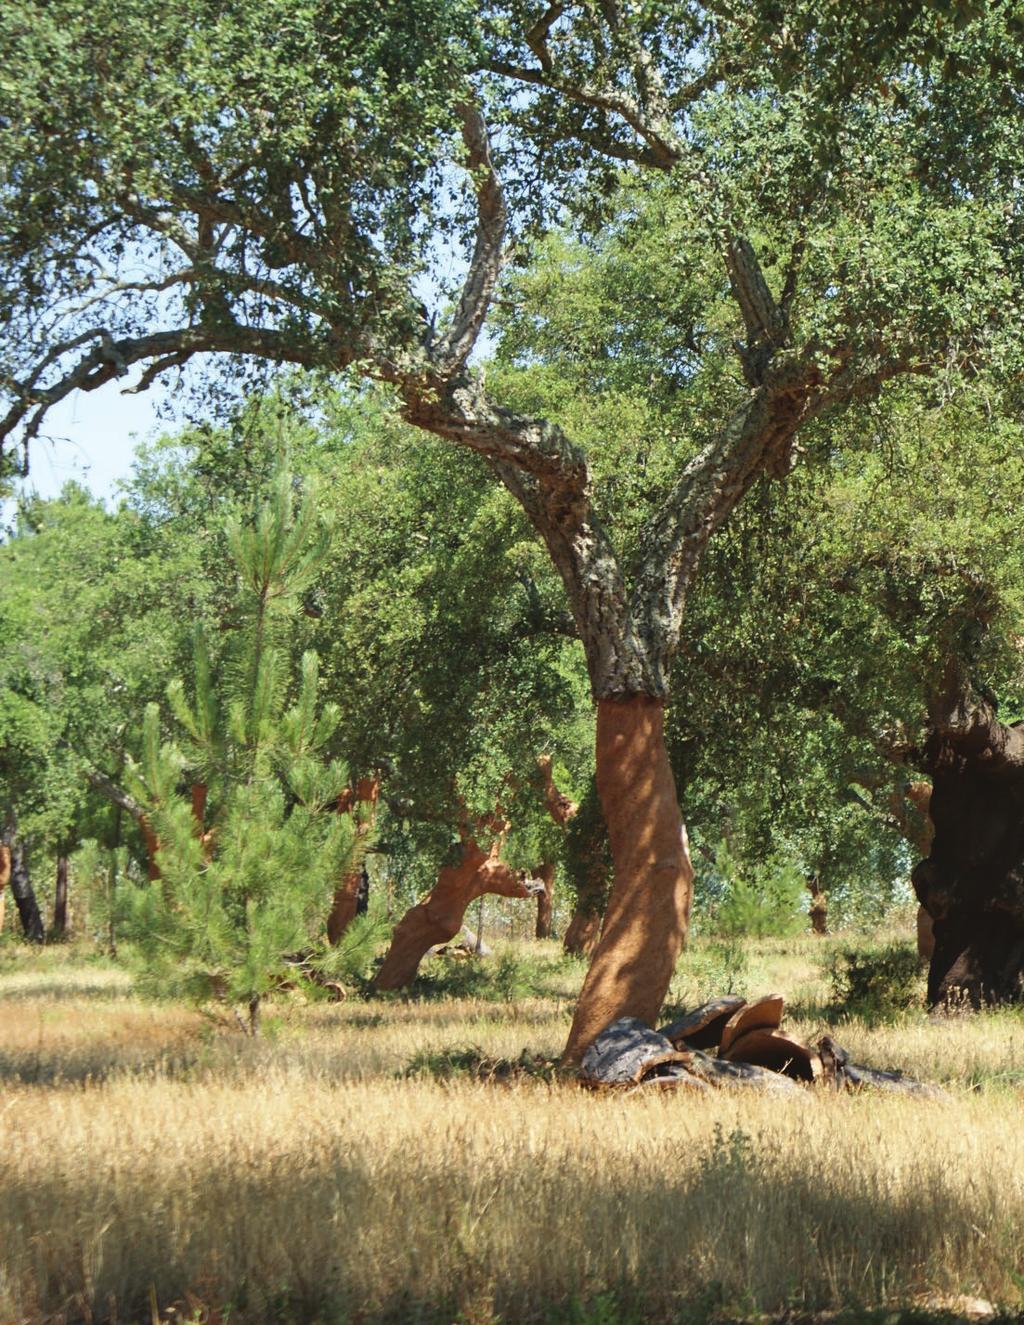 C ork comes from the bark of the cork oak tree, notable for being a renewable resource, with elasticity, resistance, low weight and impermeability to liquids and gases.